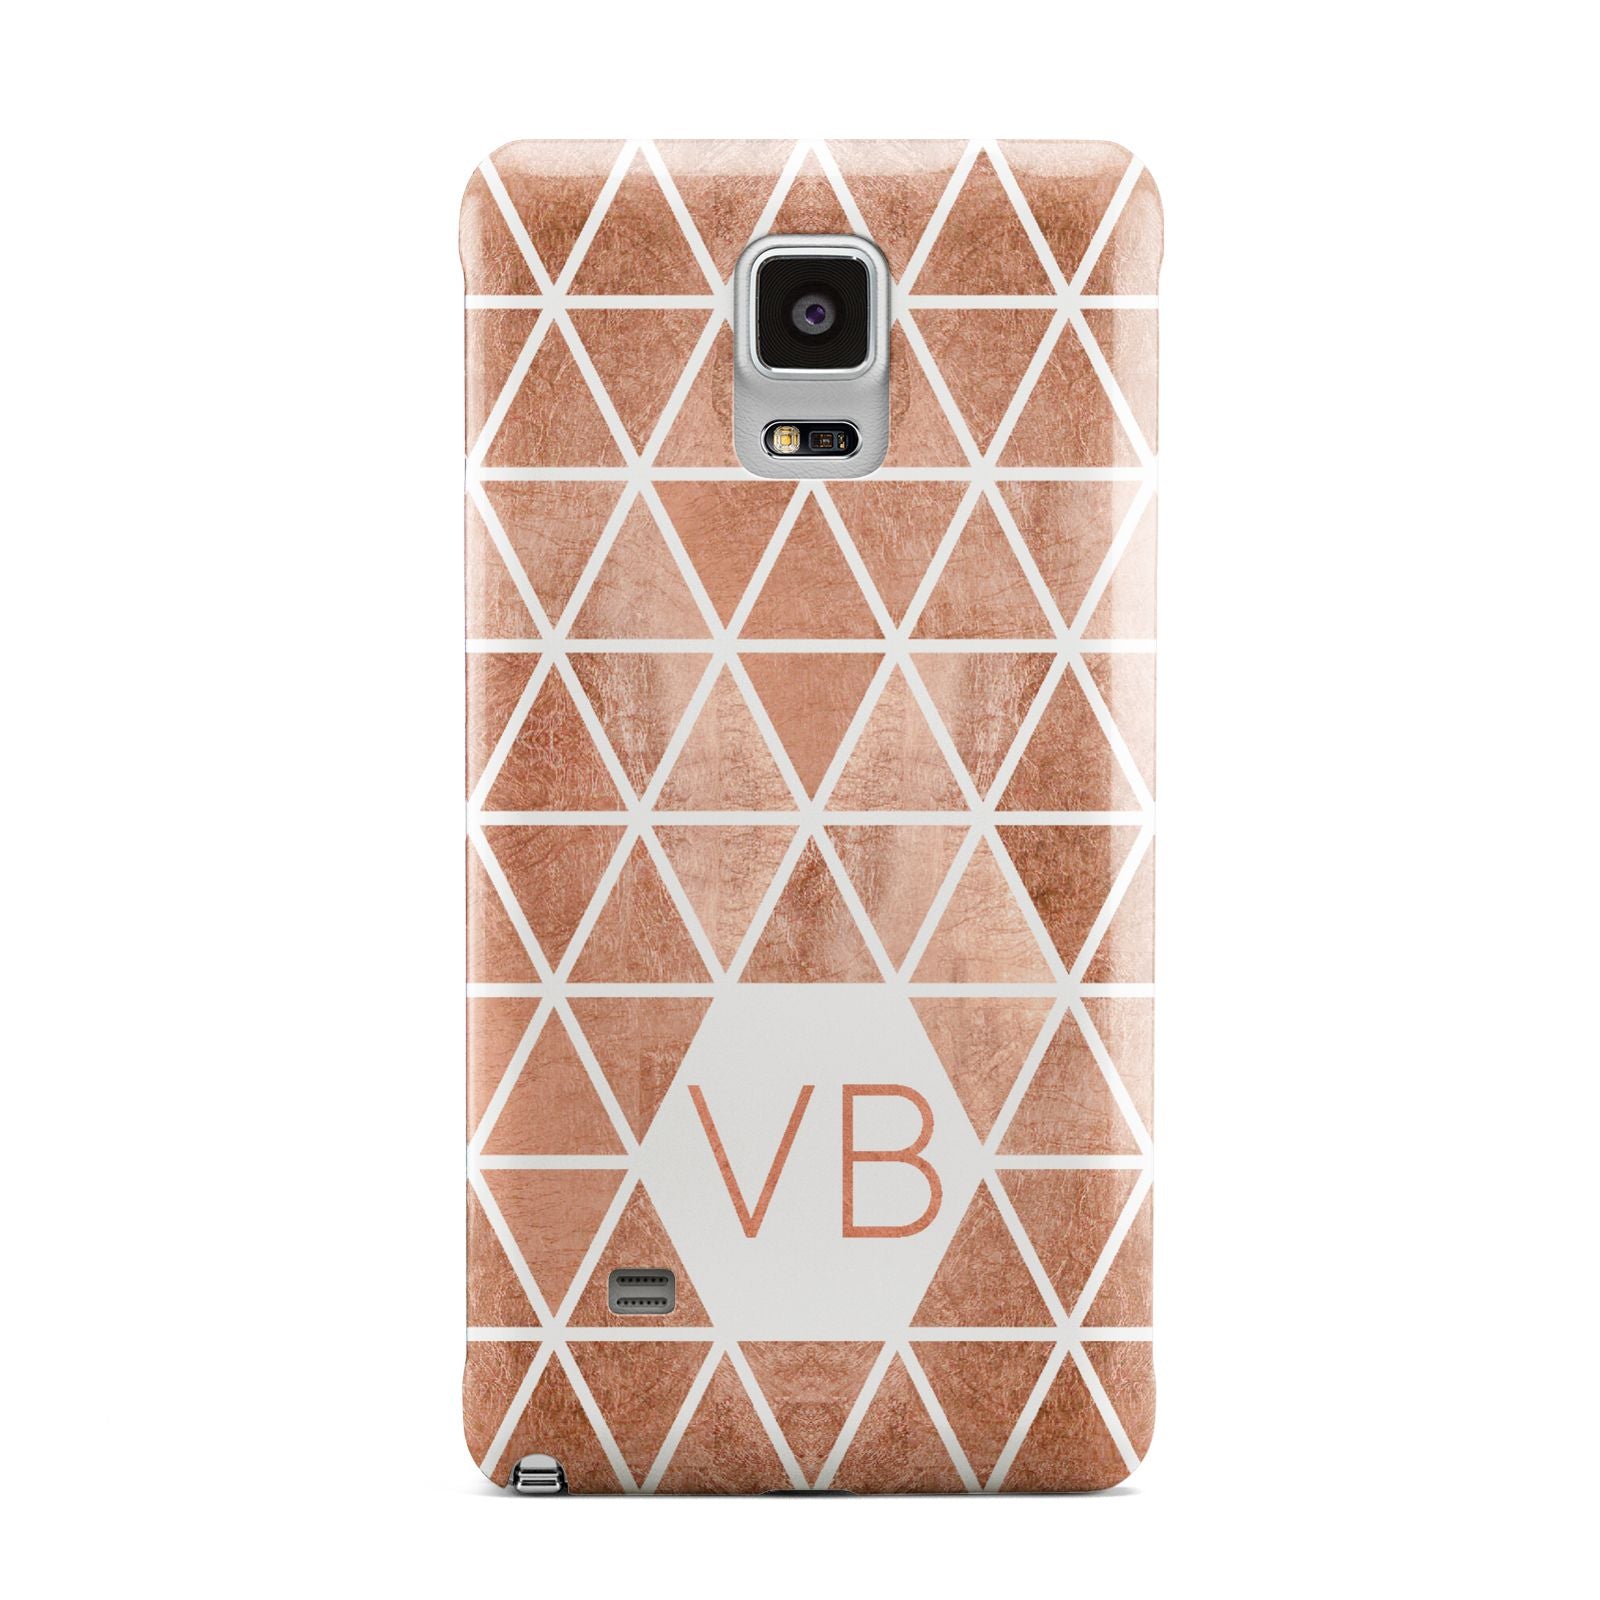 Personalised Copper Initials Samsung Galaxy Note 4 Case